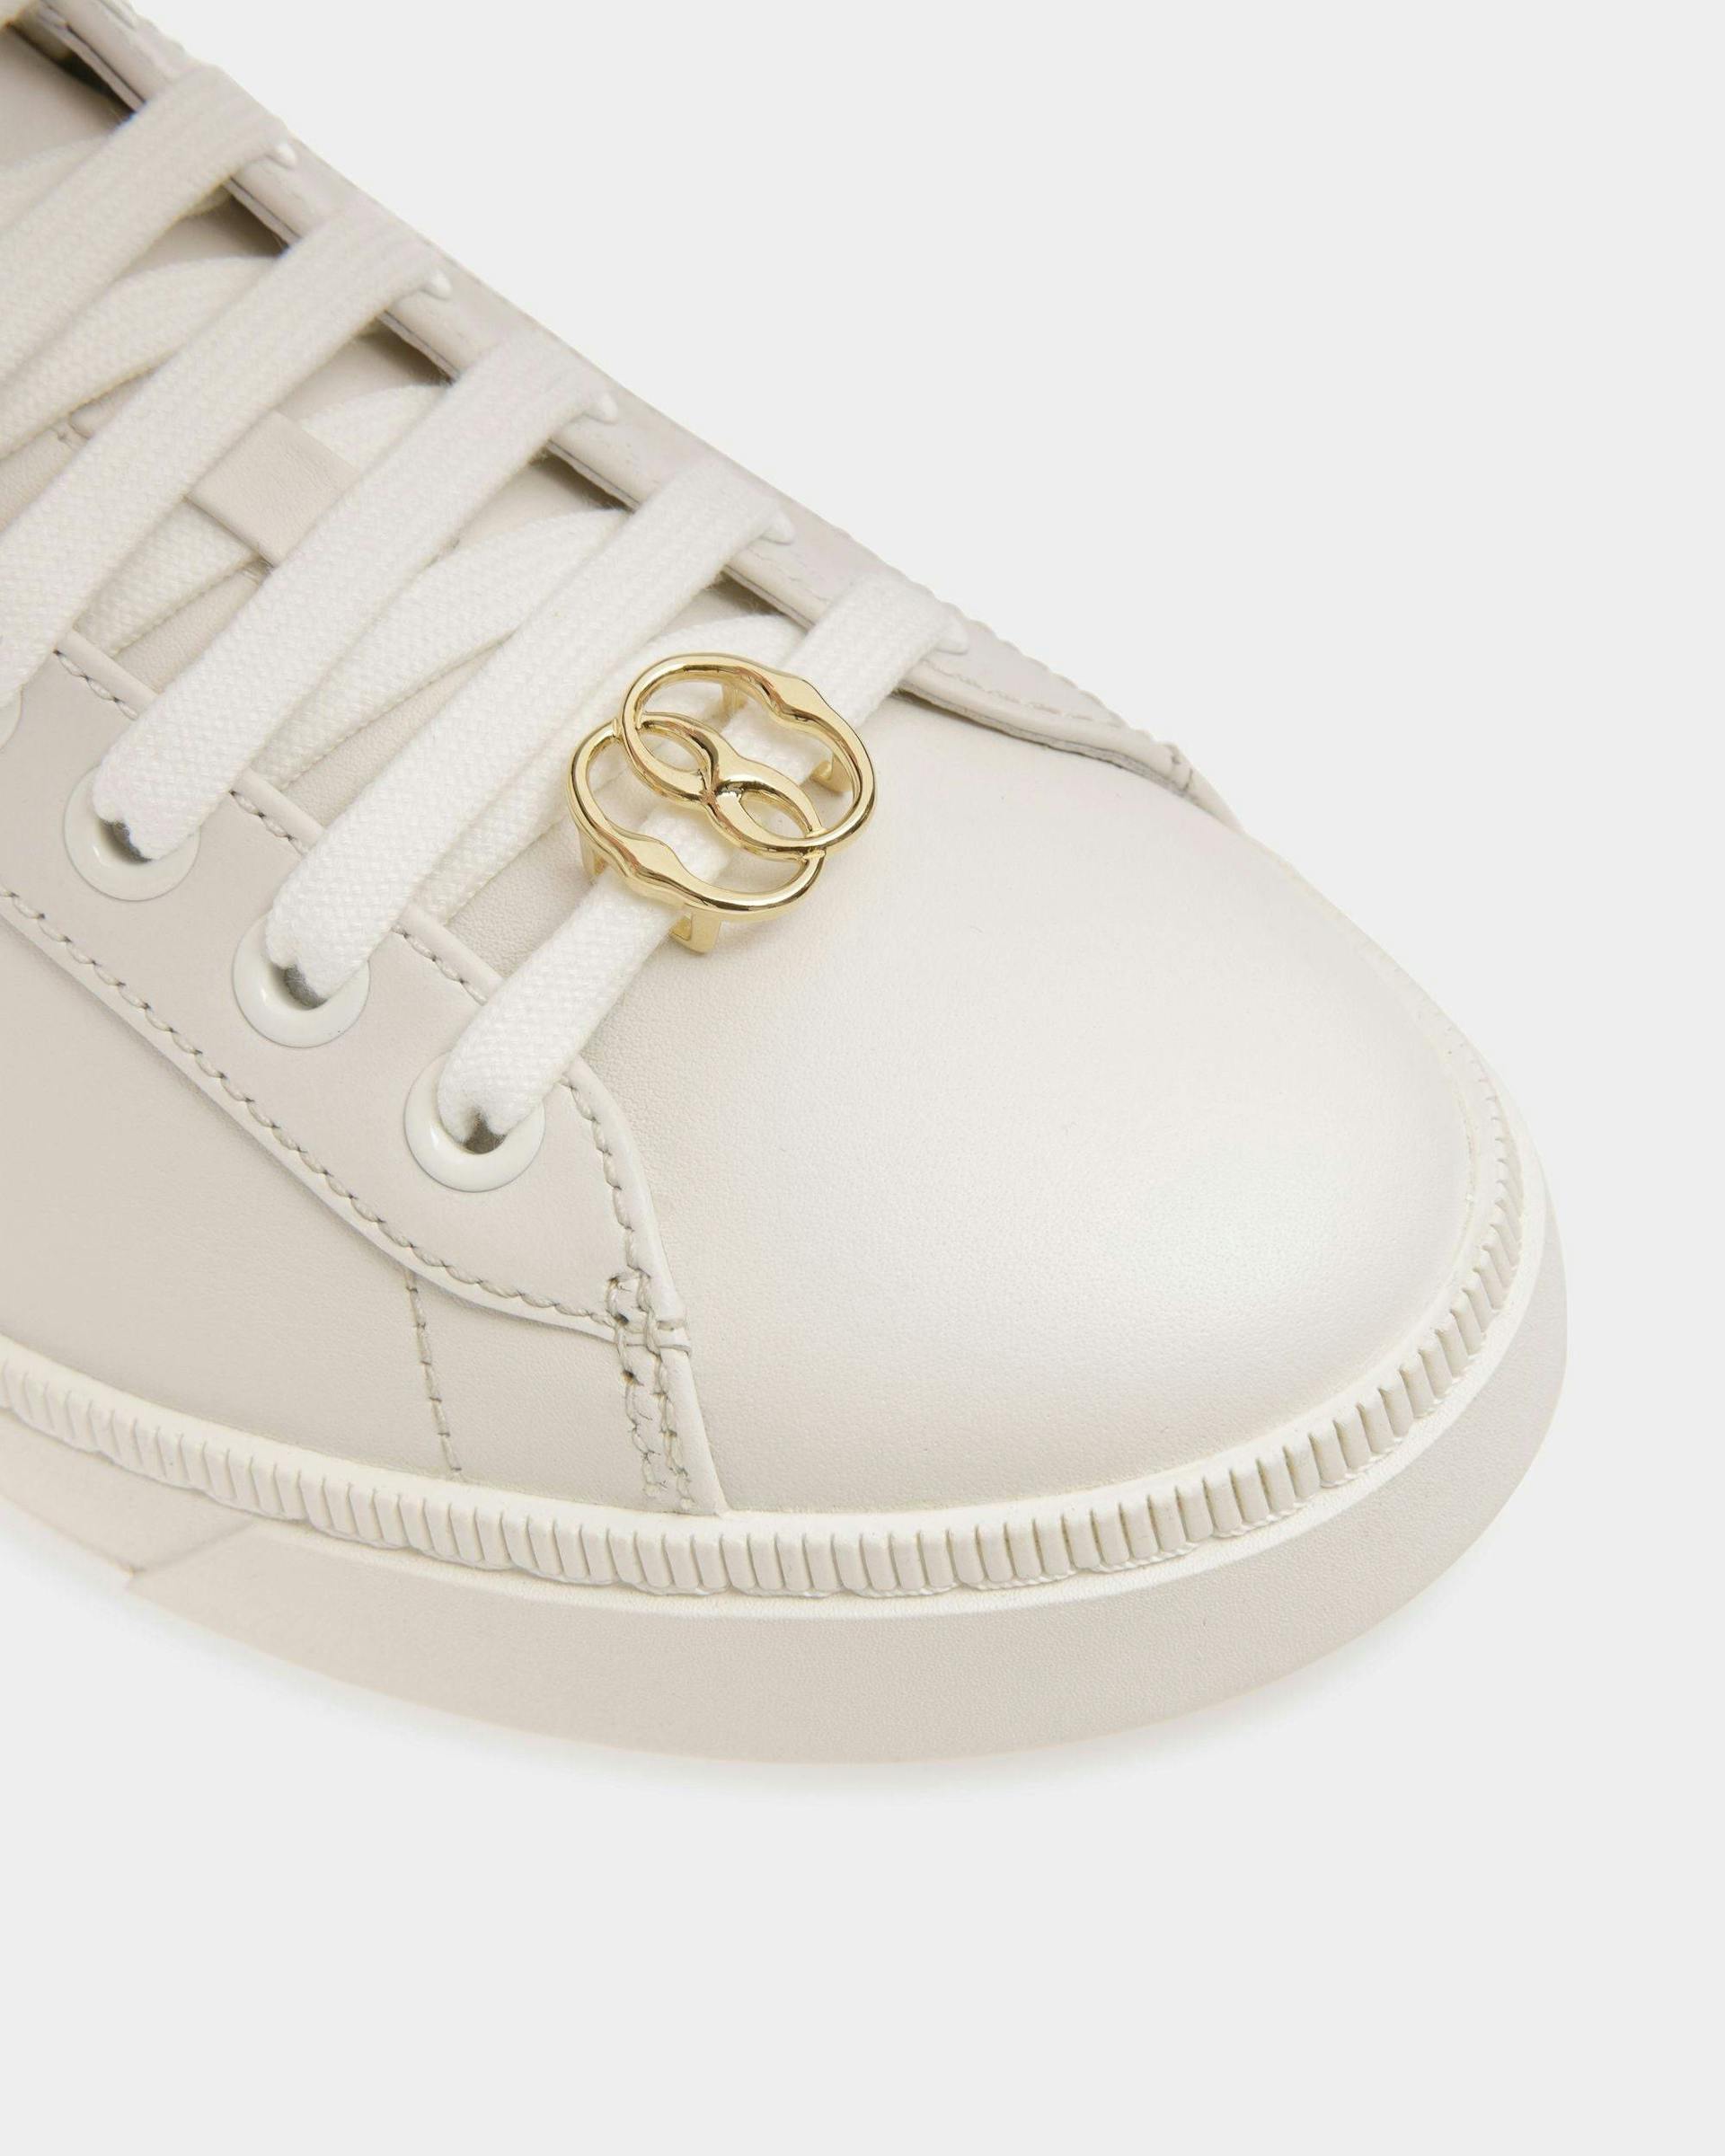 Raise Sneakers In White Leather - Women's - Bally - 06